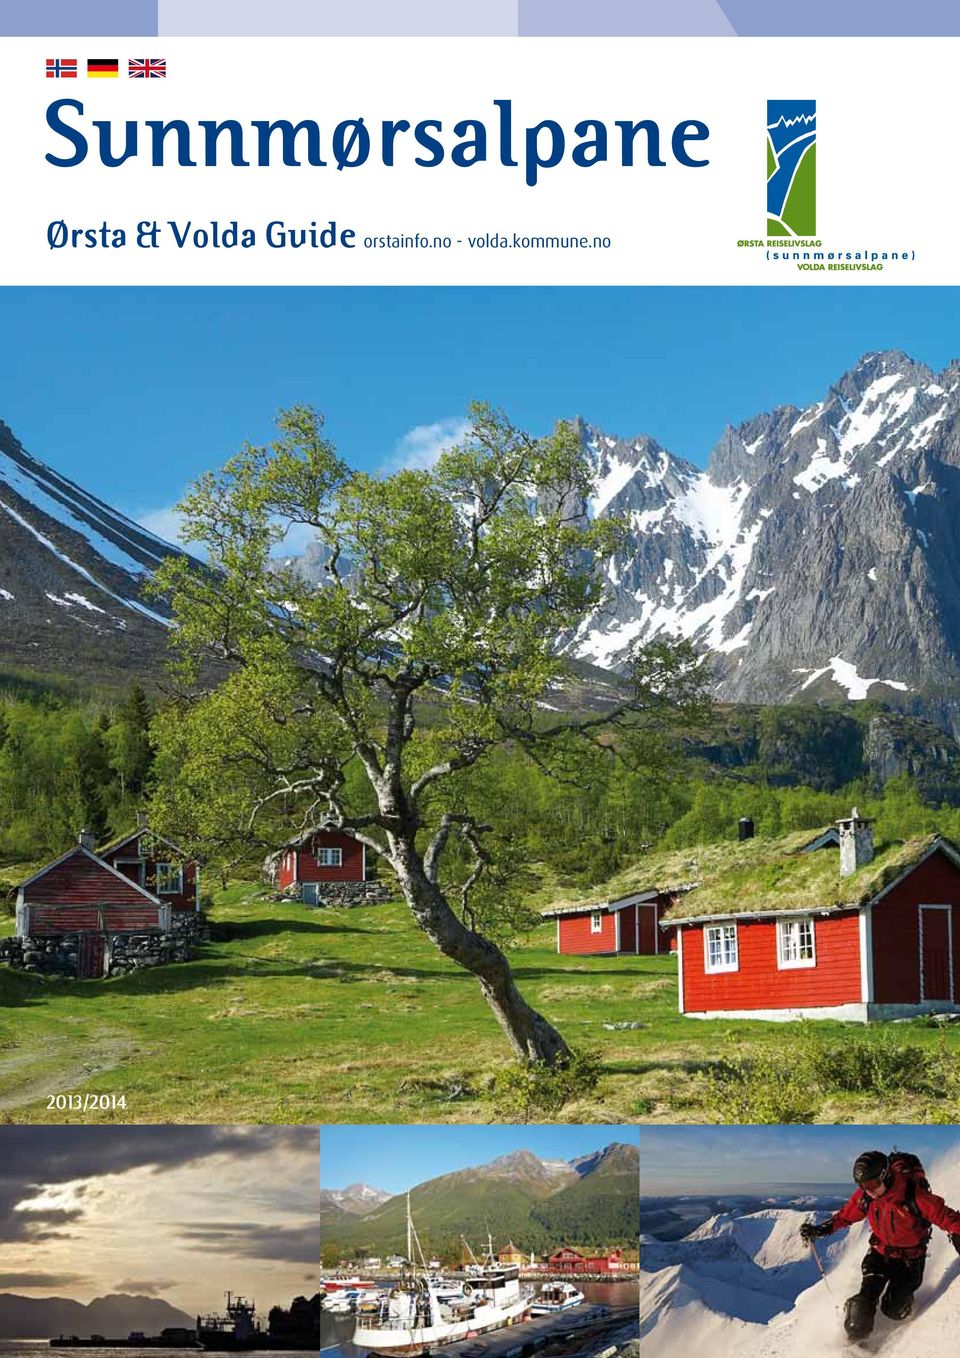 Guide orstainfo.